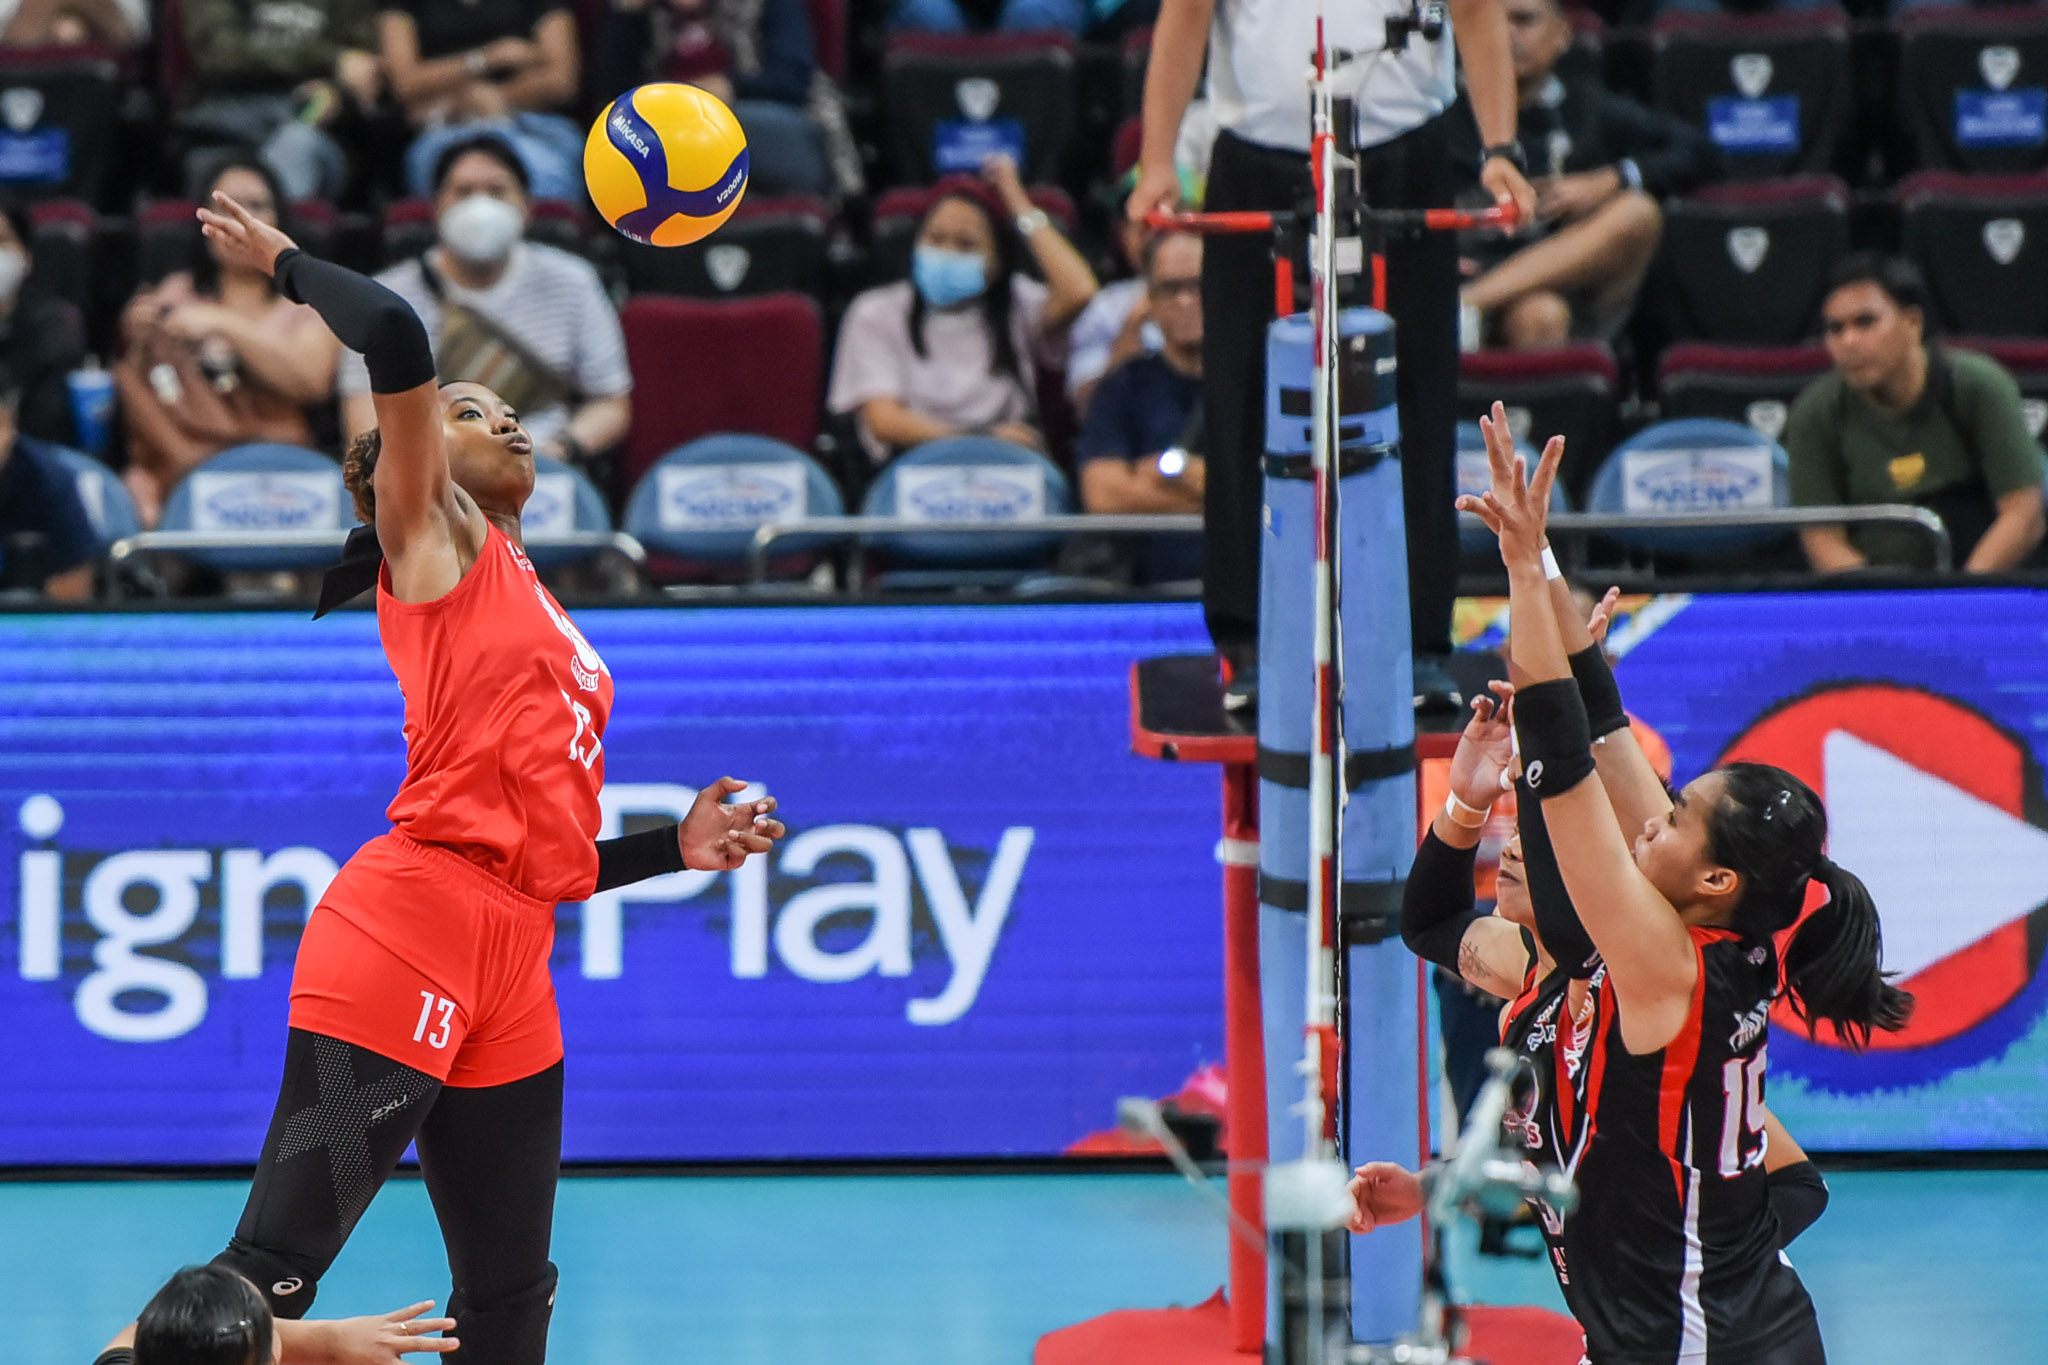 PVL-2023-Semis-PLDT-vs.-Petrogazz-G3-MJ-Phillips-6006-1 Though excited for KVL draft, MJ Phillips remains focused on task at hand with Petro Gazz News PVL Volleyball  - philippine sports news